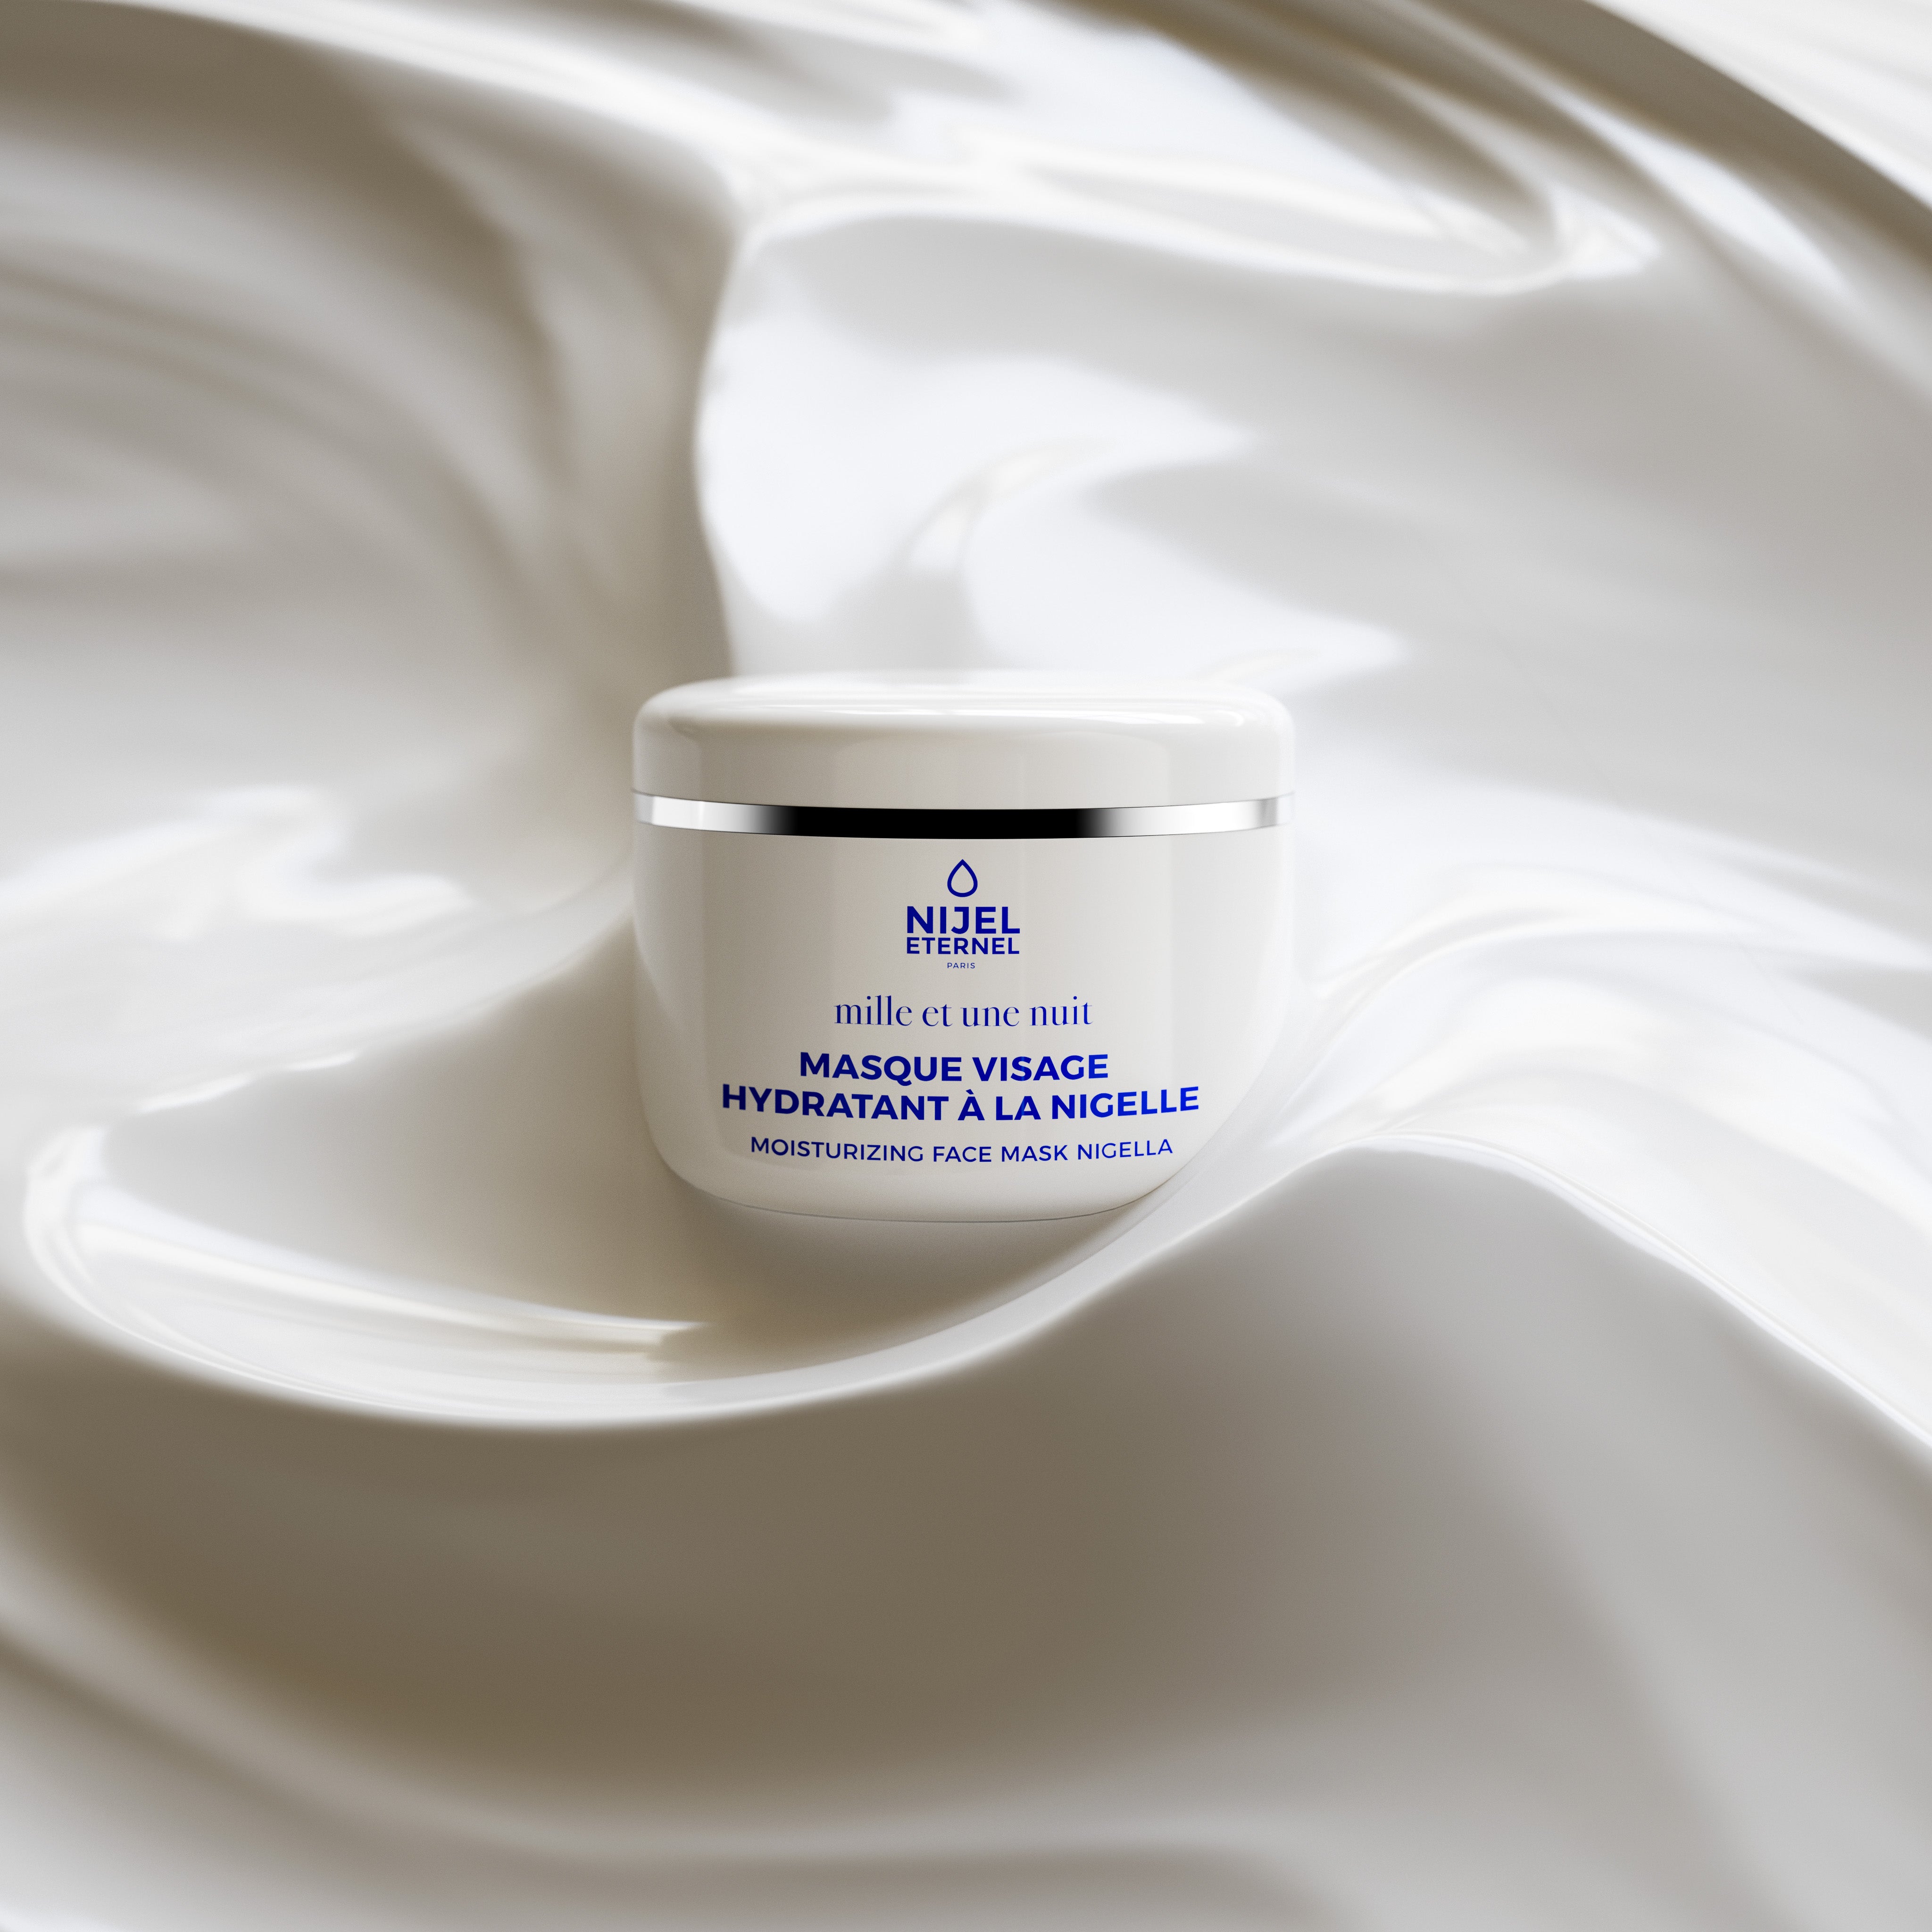 Hydrating face mask in Nigelle